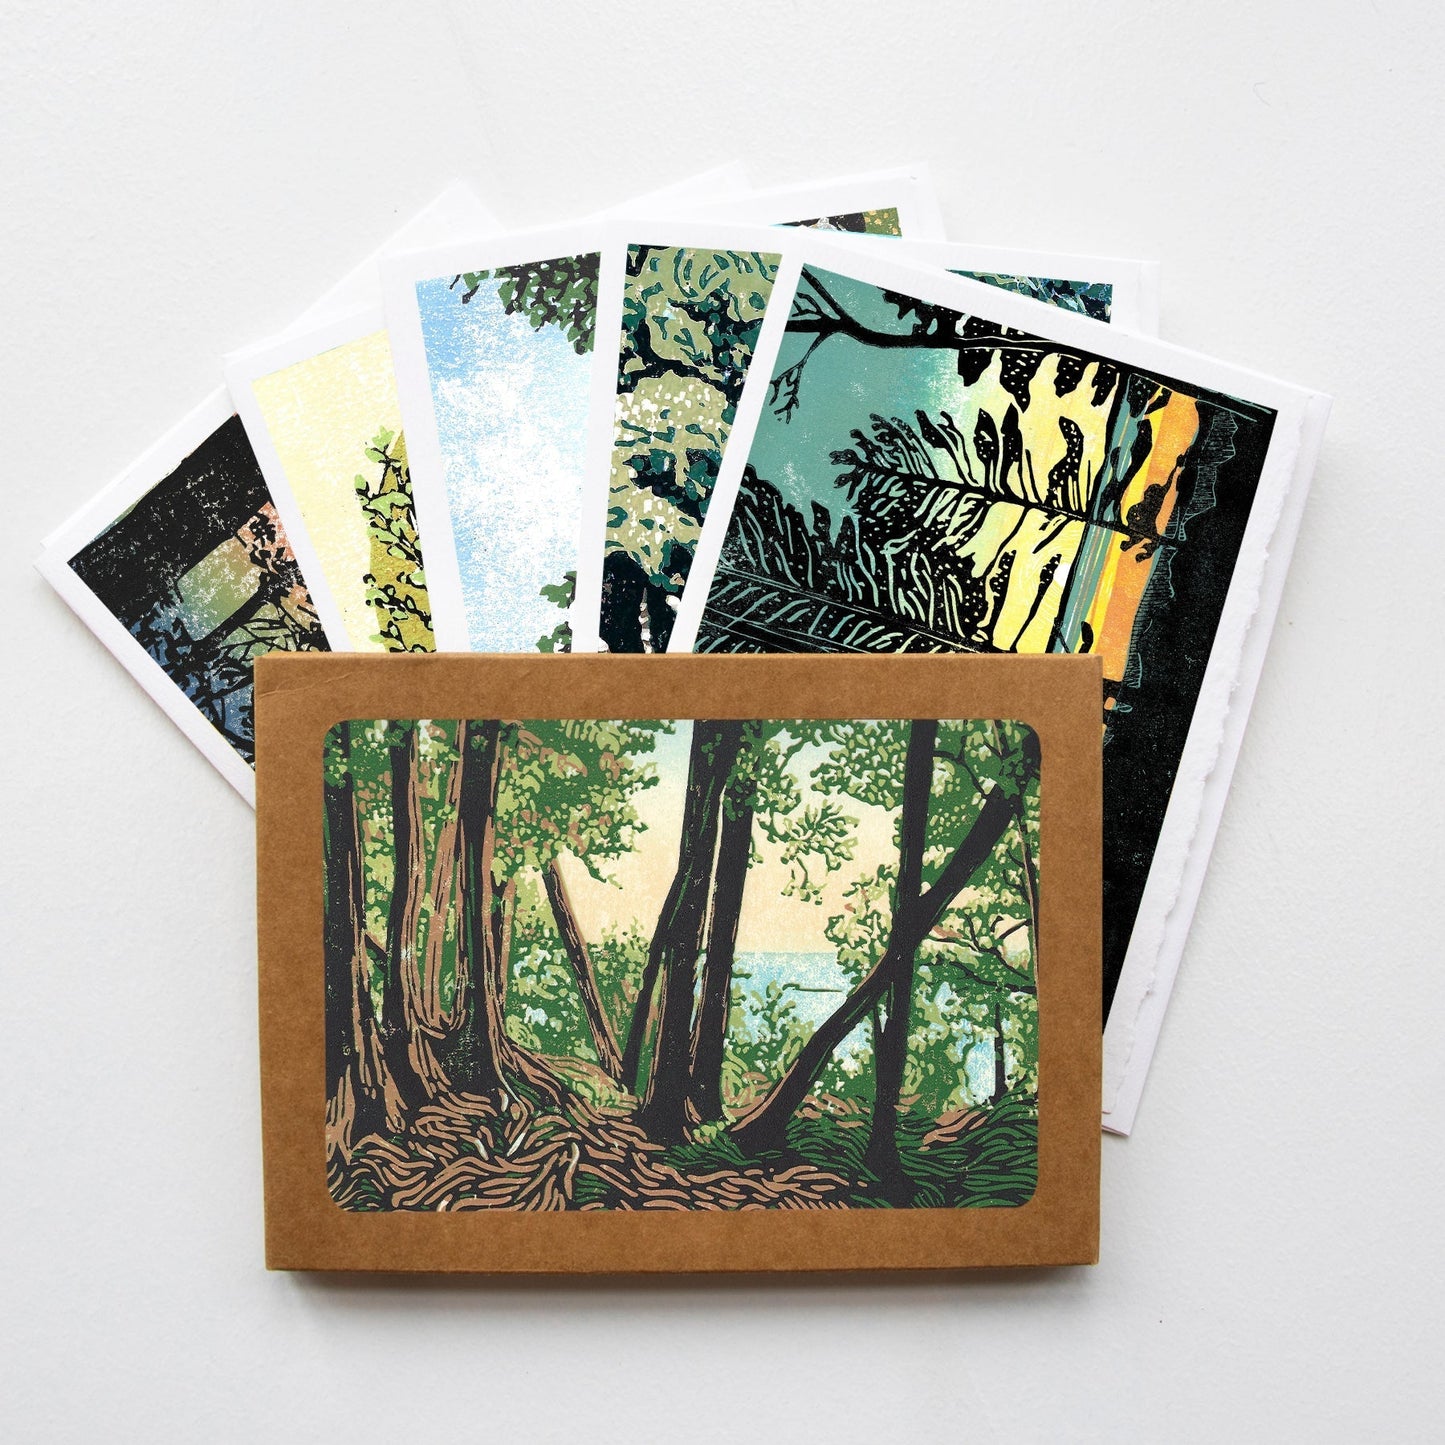 A casually elegant card set featuring Michigan landscapes art by Natalia Wohletz.